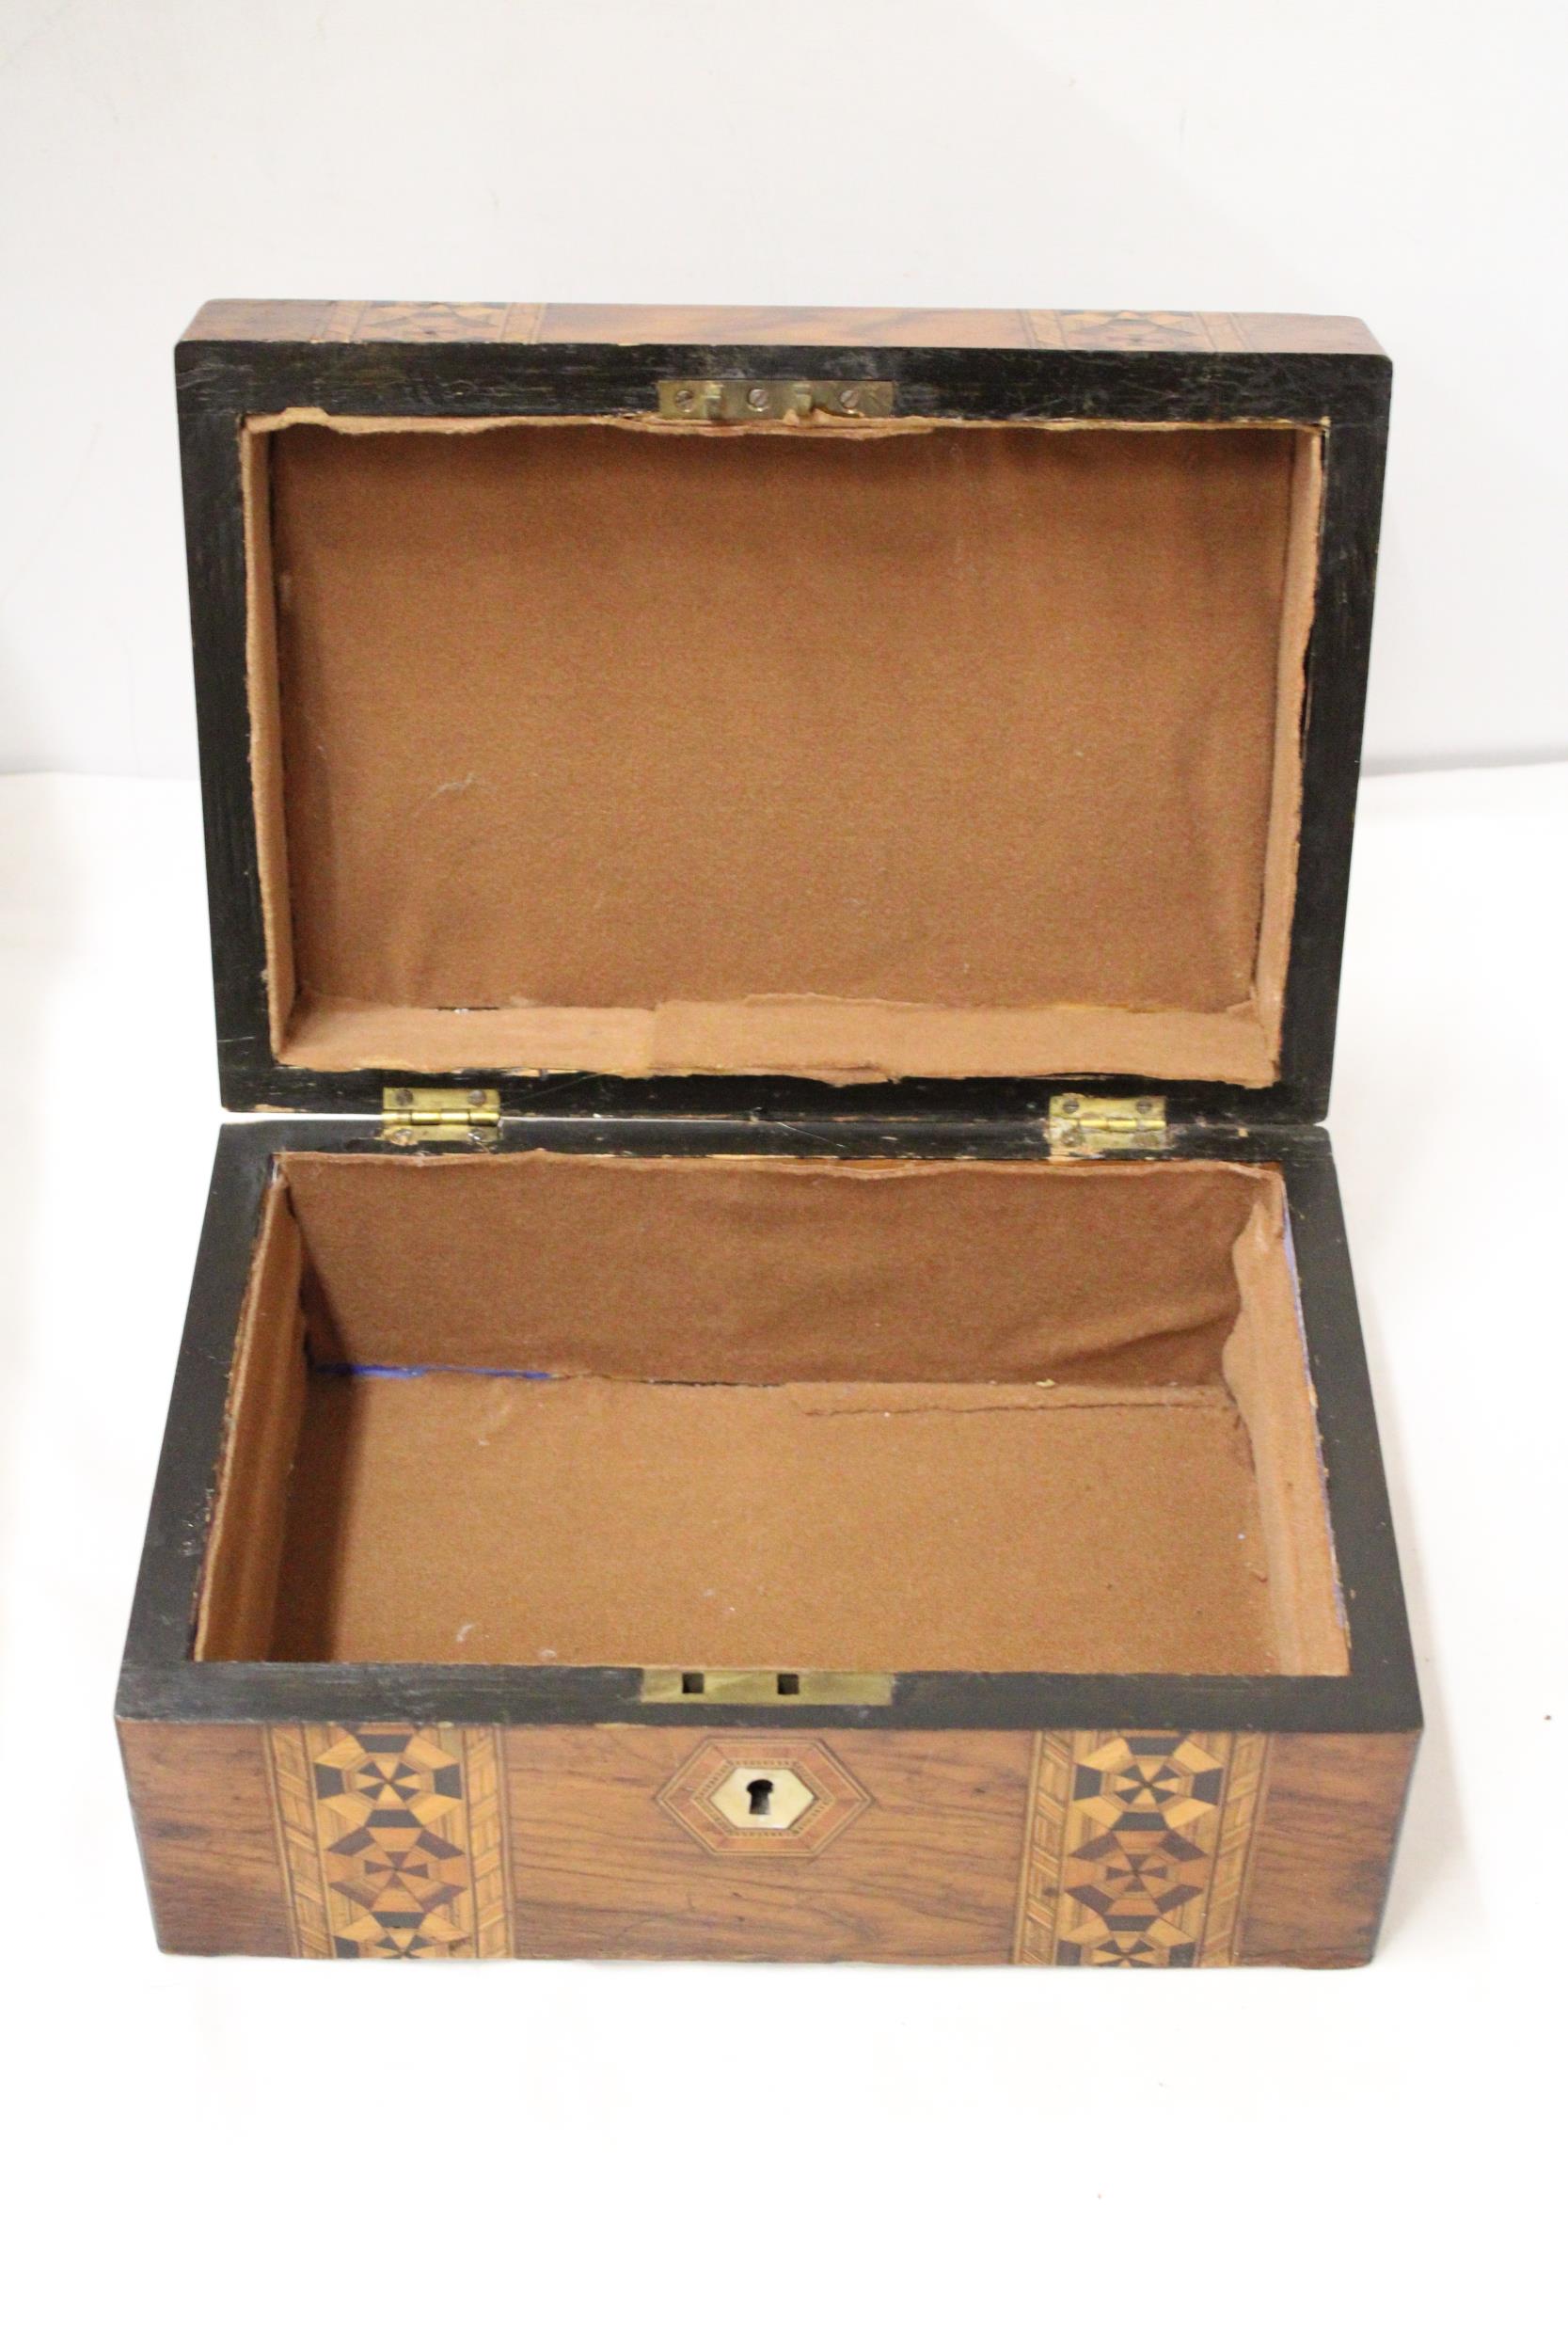 AN EARLY VICTORIAN ROSEWOOD ULTITY BOX WITH MARQUETRY AND NACRE 10" X 7" X 5" - Image 4 of 4